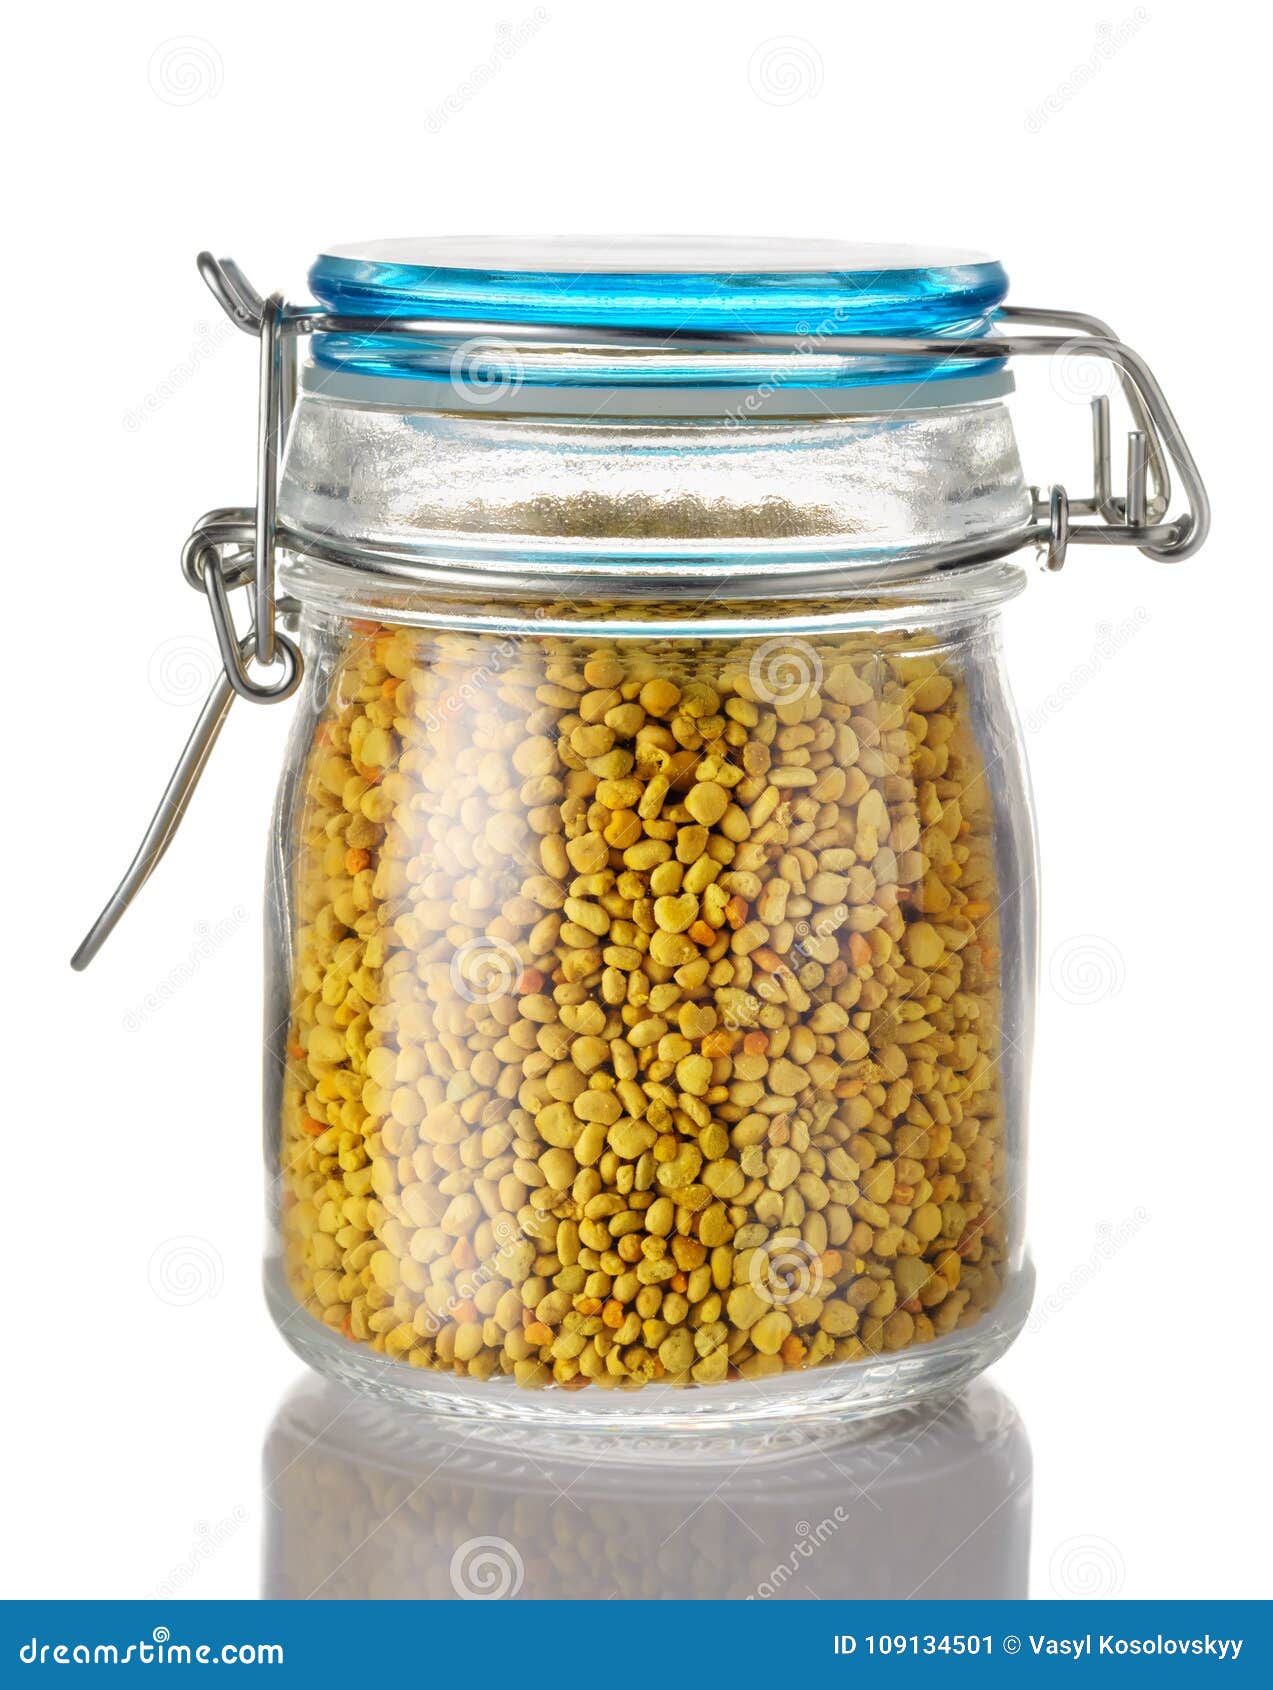 a beer pollen in a glass jar is on a white background. natural remedy for immunity enhancement. beekeeping